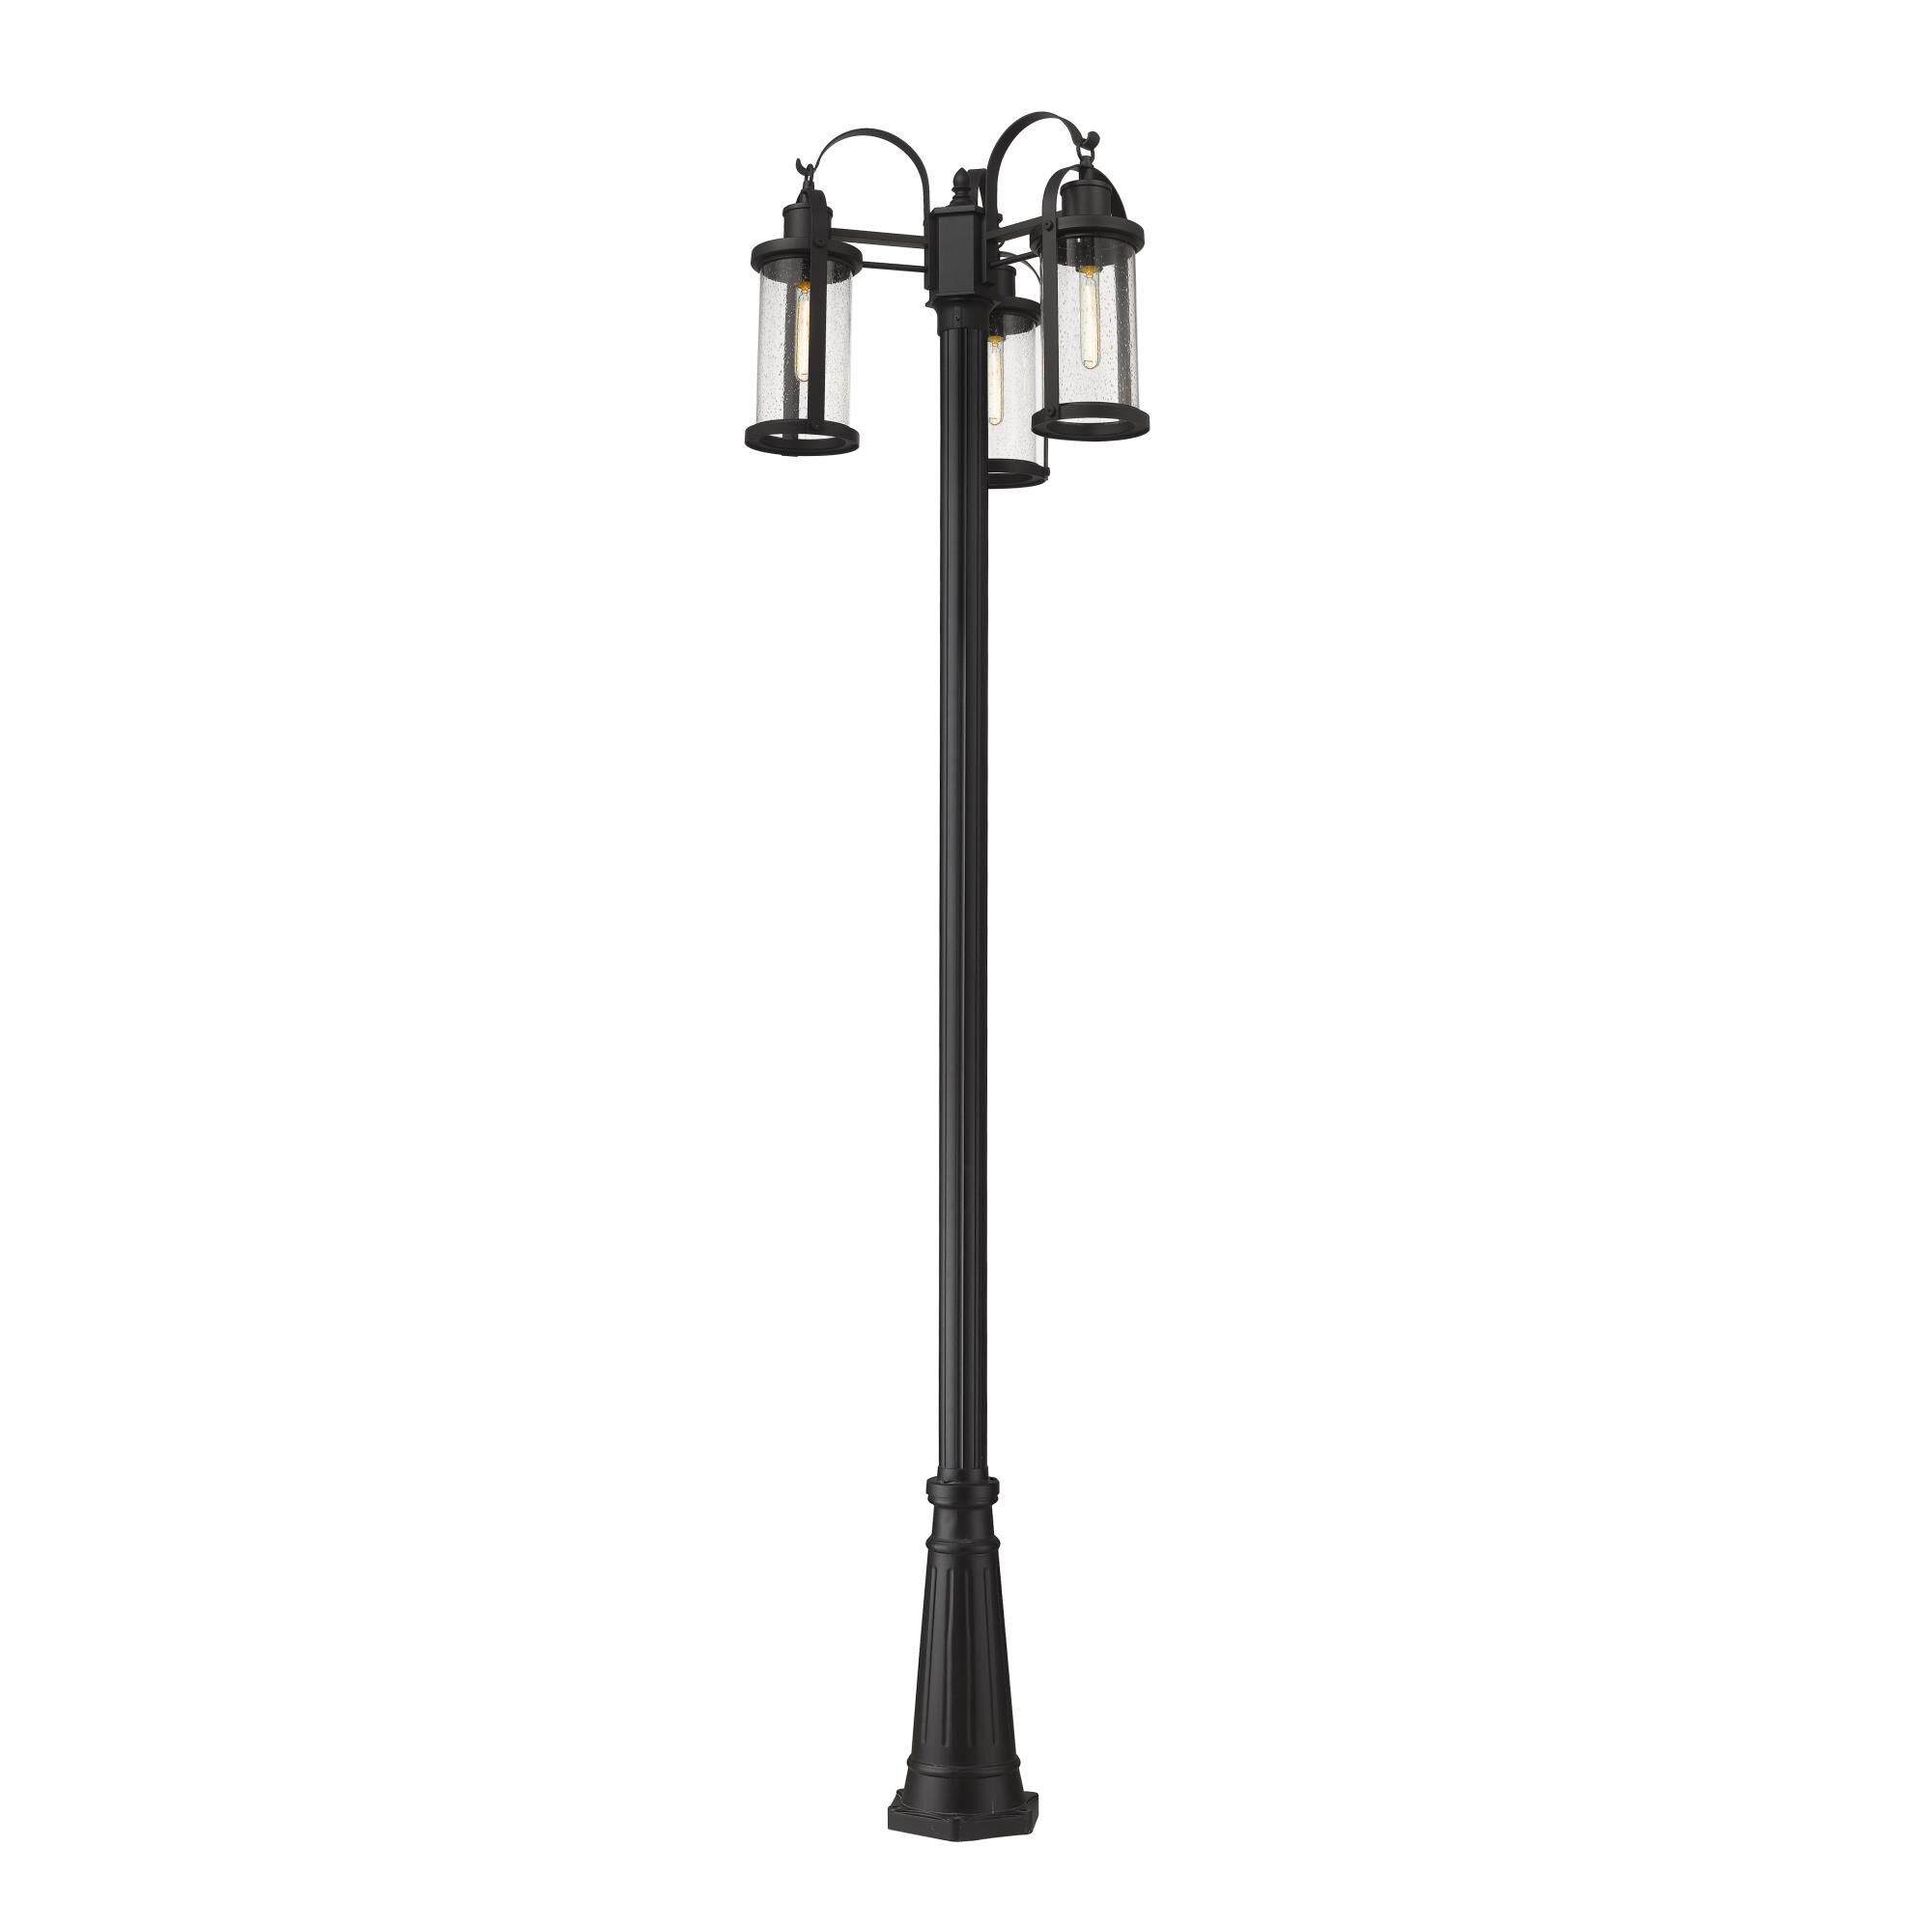 Photos - Floodlight / Street Light Z-Lite Roundhouse 114 Inch Tall 3 Light Outdoor Post Lamp Roundhouse - 569